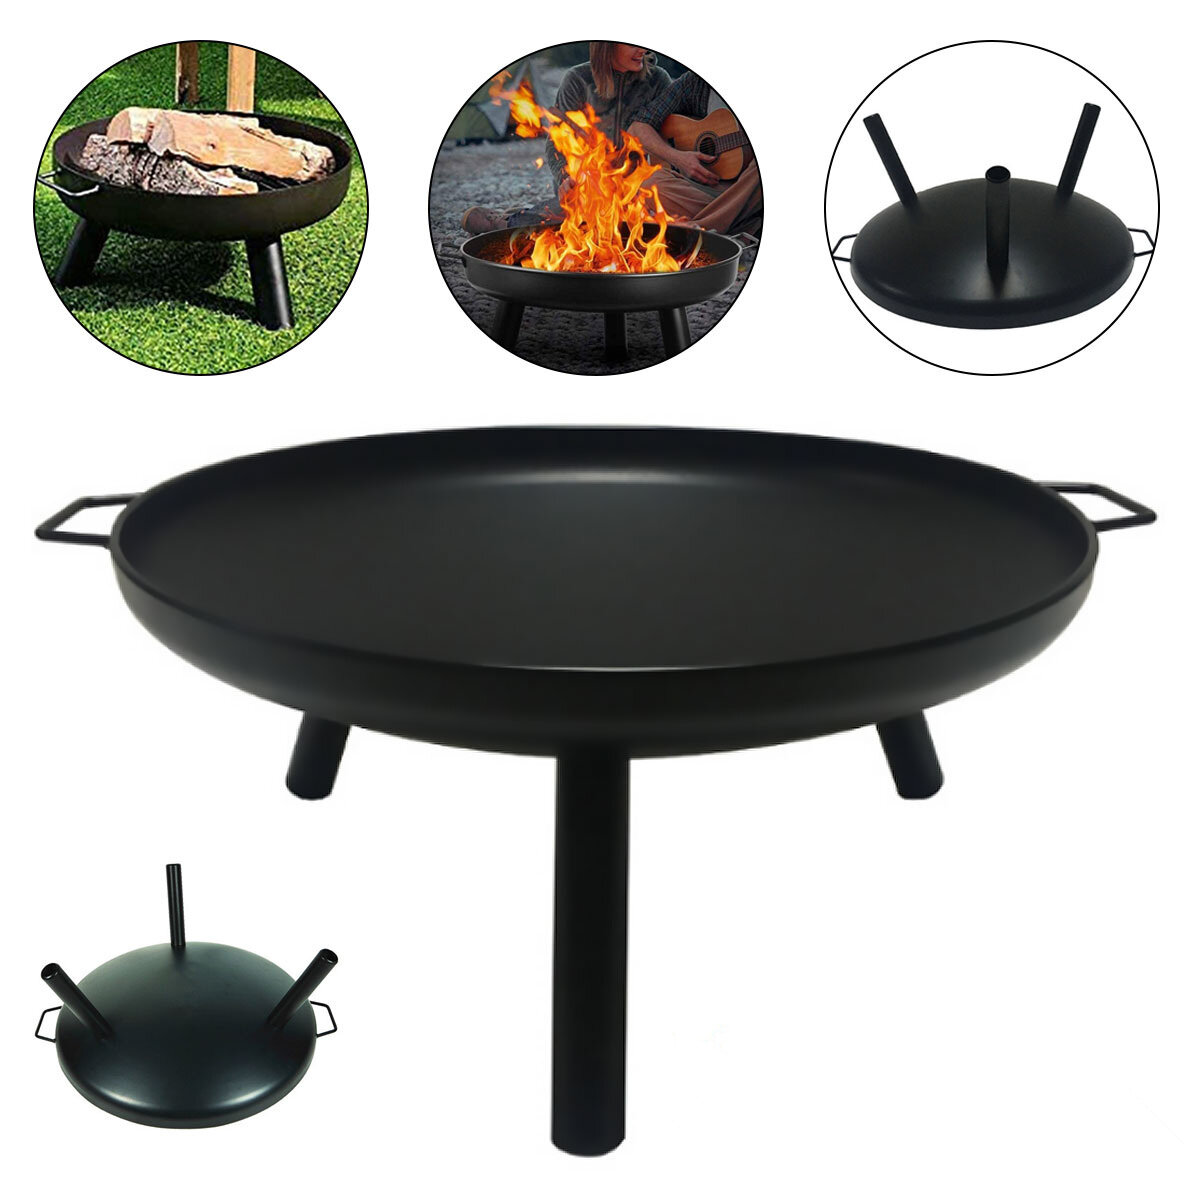 [EU Direct] IPRee® 24inch Fire Pit Metal Outdoors Barbecue Heater Garden Patio Ice Pit Metal Brazier Round Wood Burning Fireplace